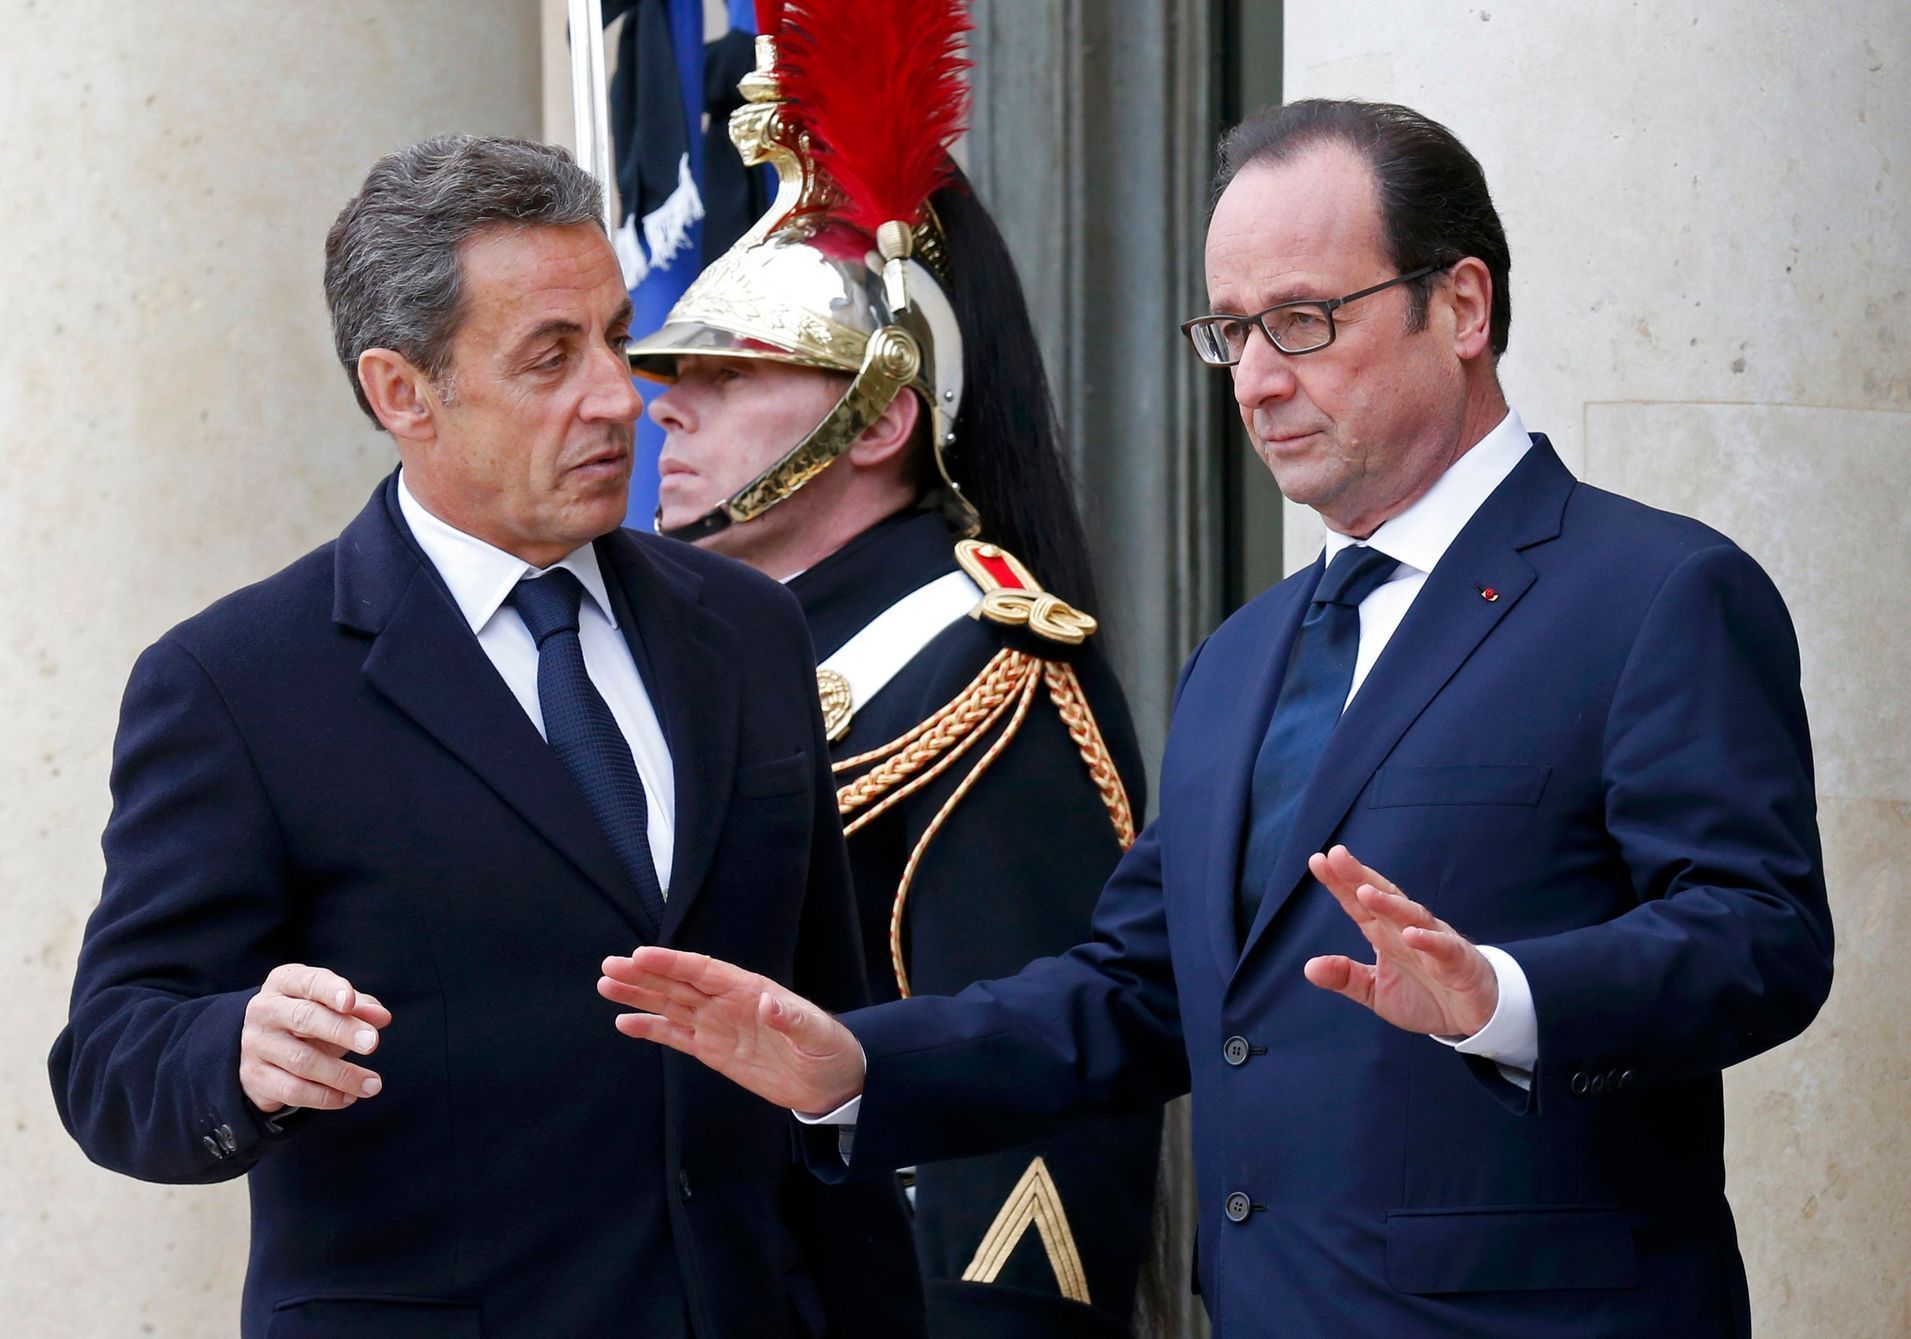 French President Francois Hollande welcomes former French President Nicolas Sarkozy, head of the French conservative party UMP party, at the Elysee Palace before attending a solidarity march in the st